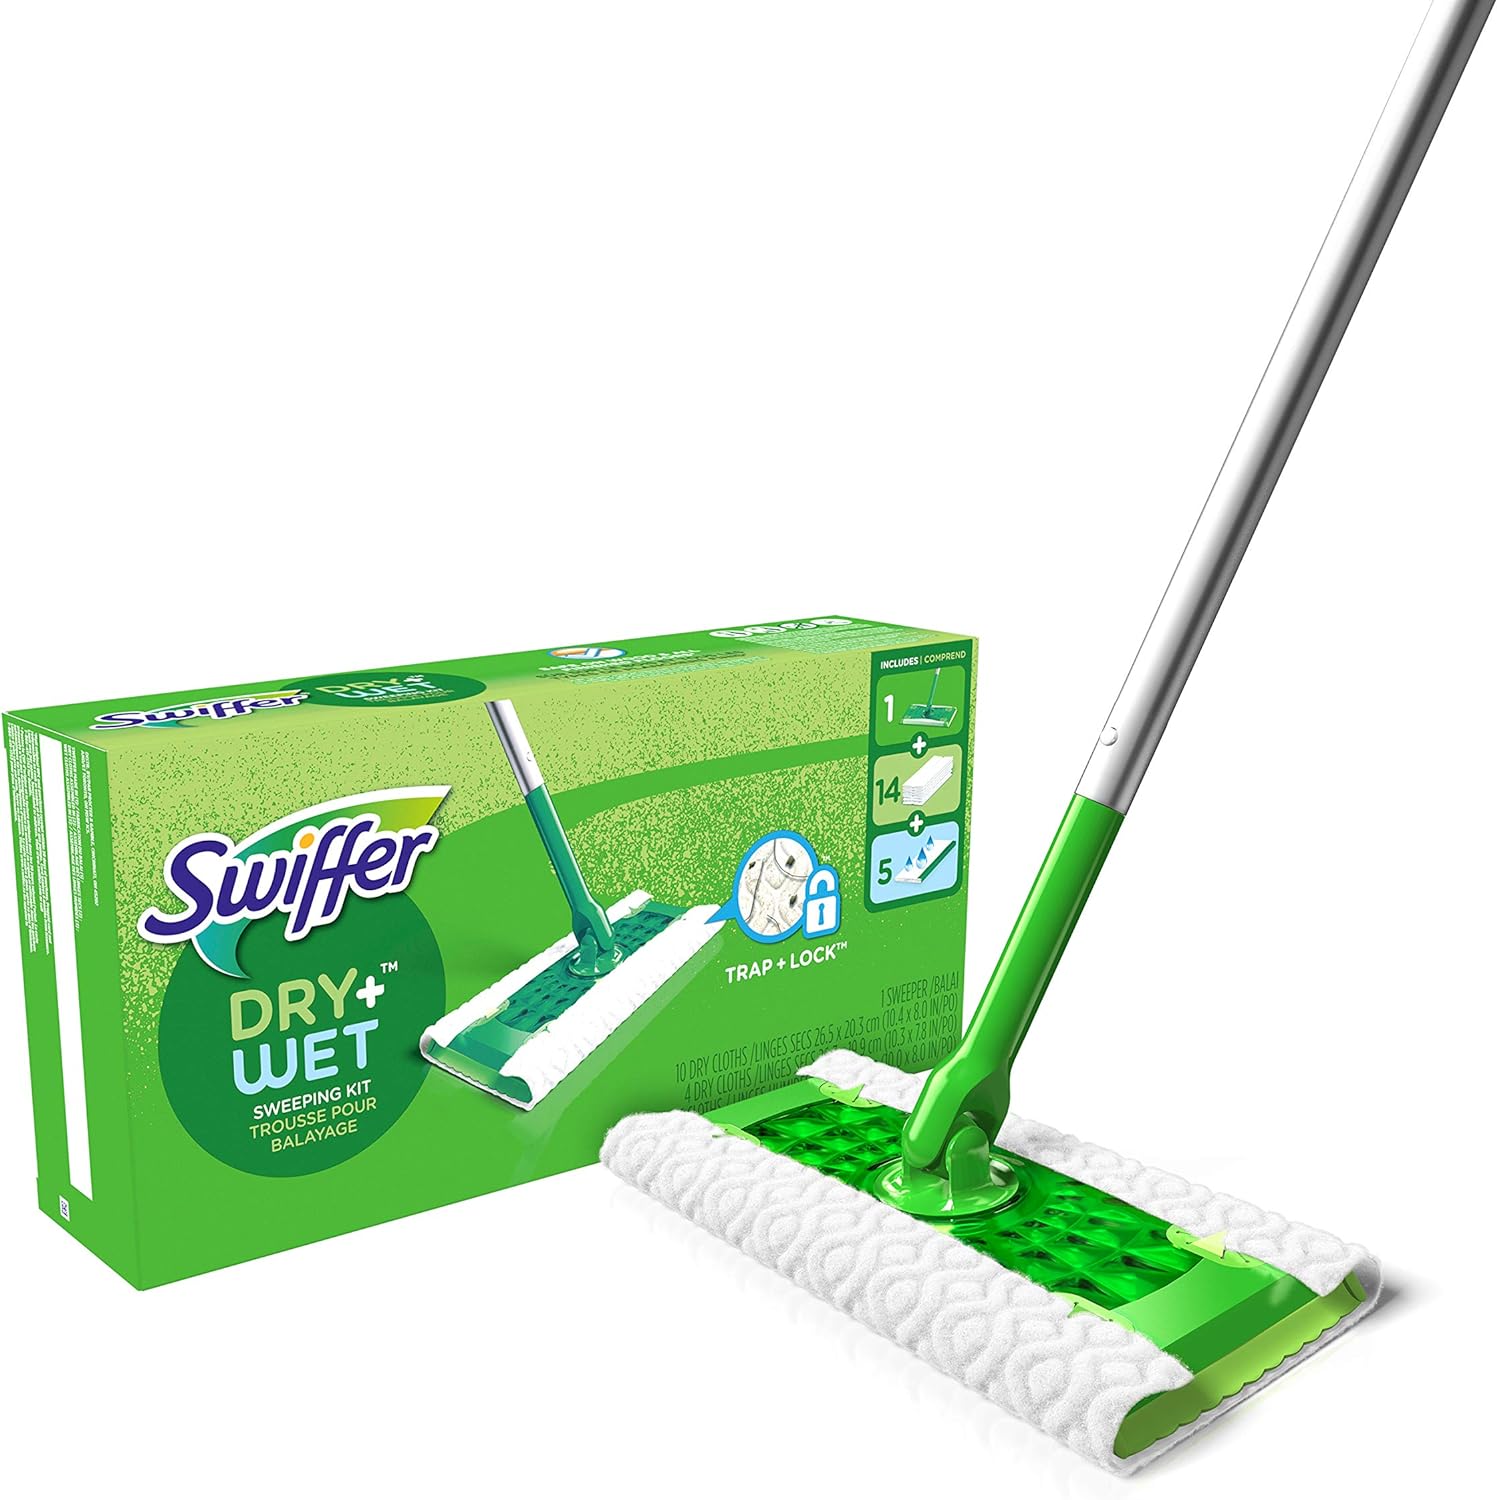 Swiffer Dry + Wet Sweeping Kit, 1 Sweeper, 7 Dry Cloths, 3 Wet Cloths